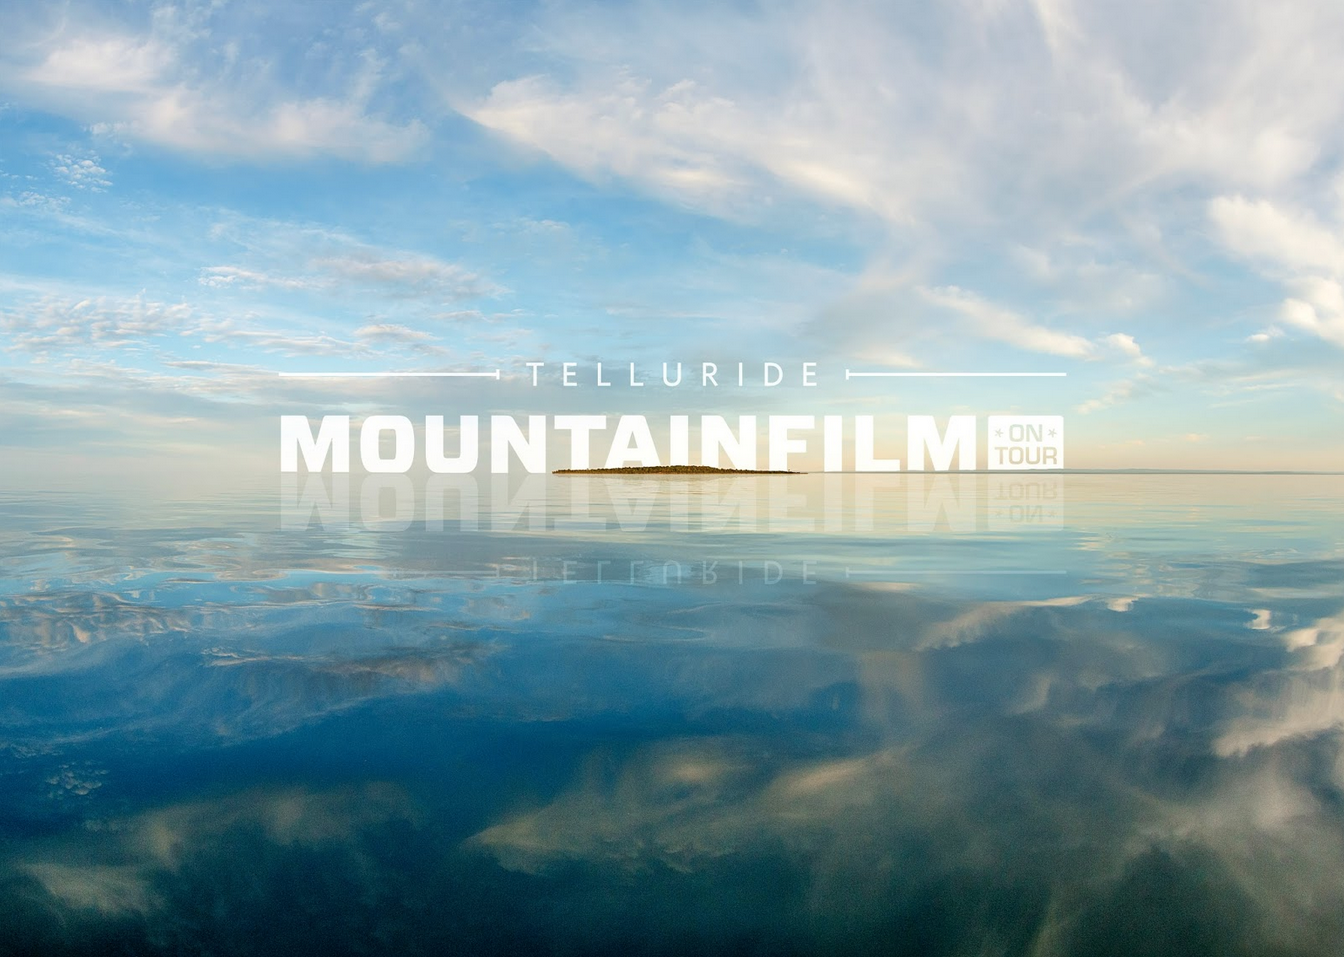 Sky reflecting on water with remote island. Telluride Mountain Film 2015